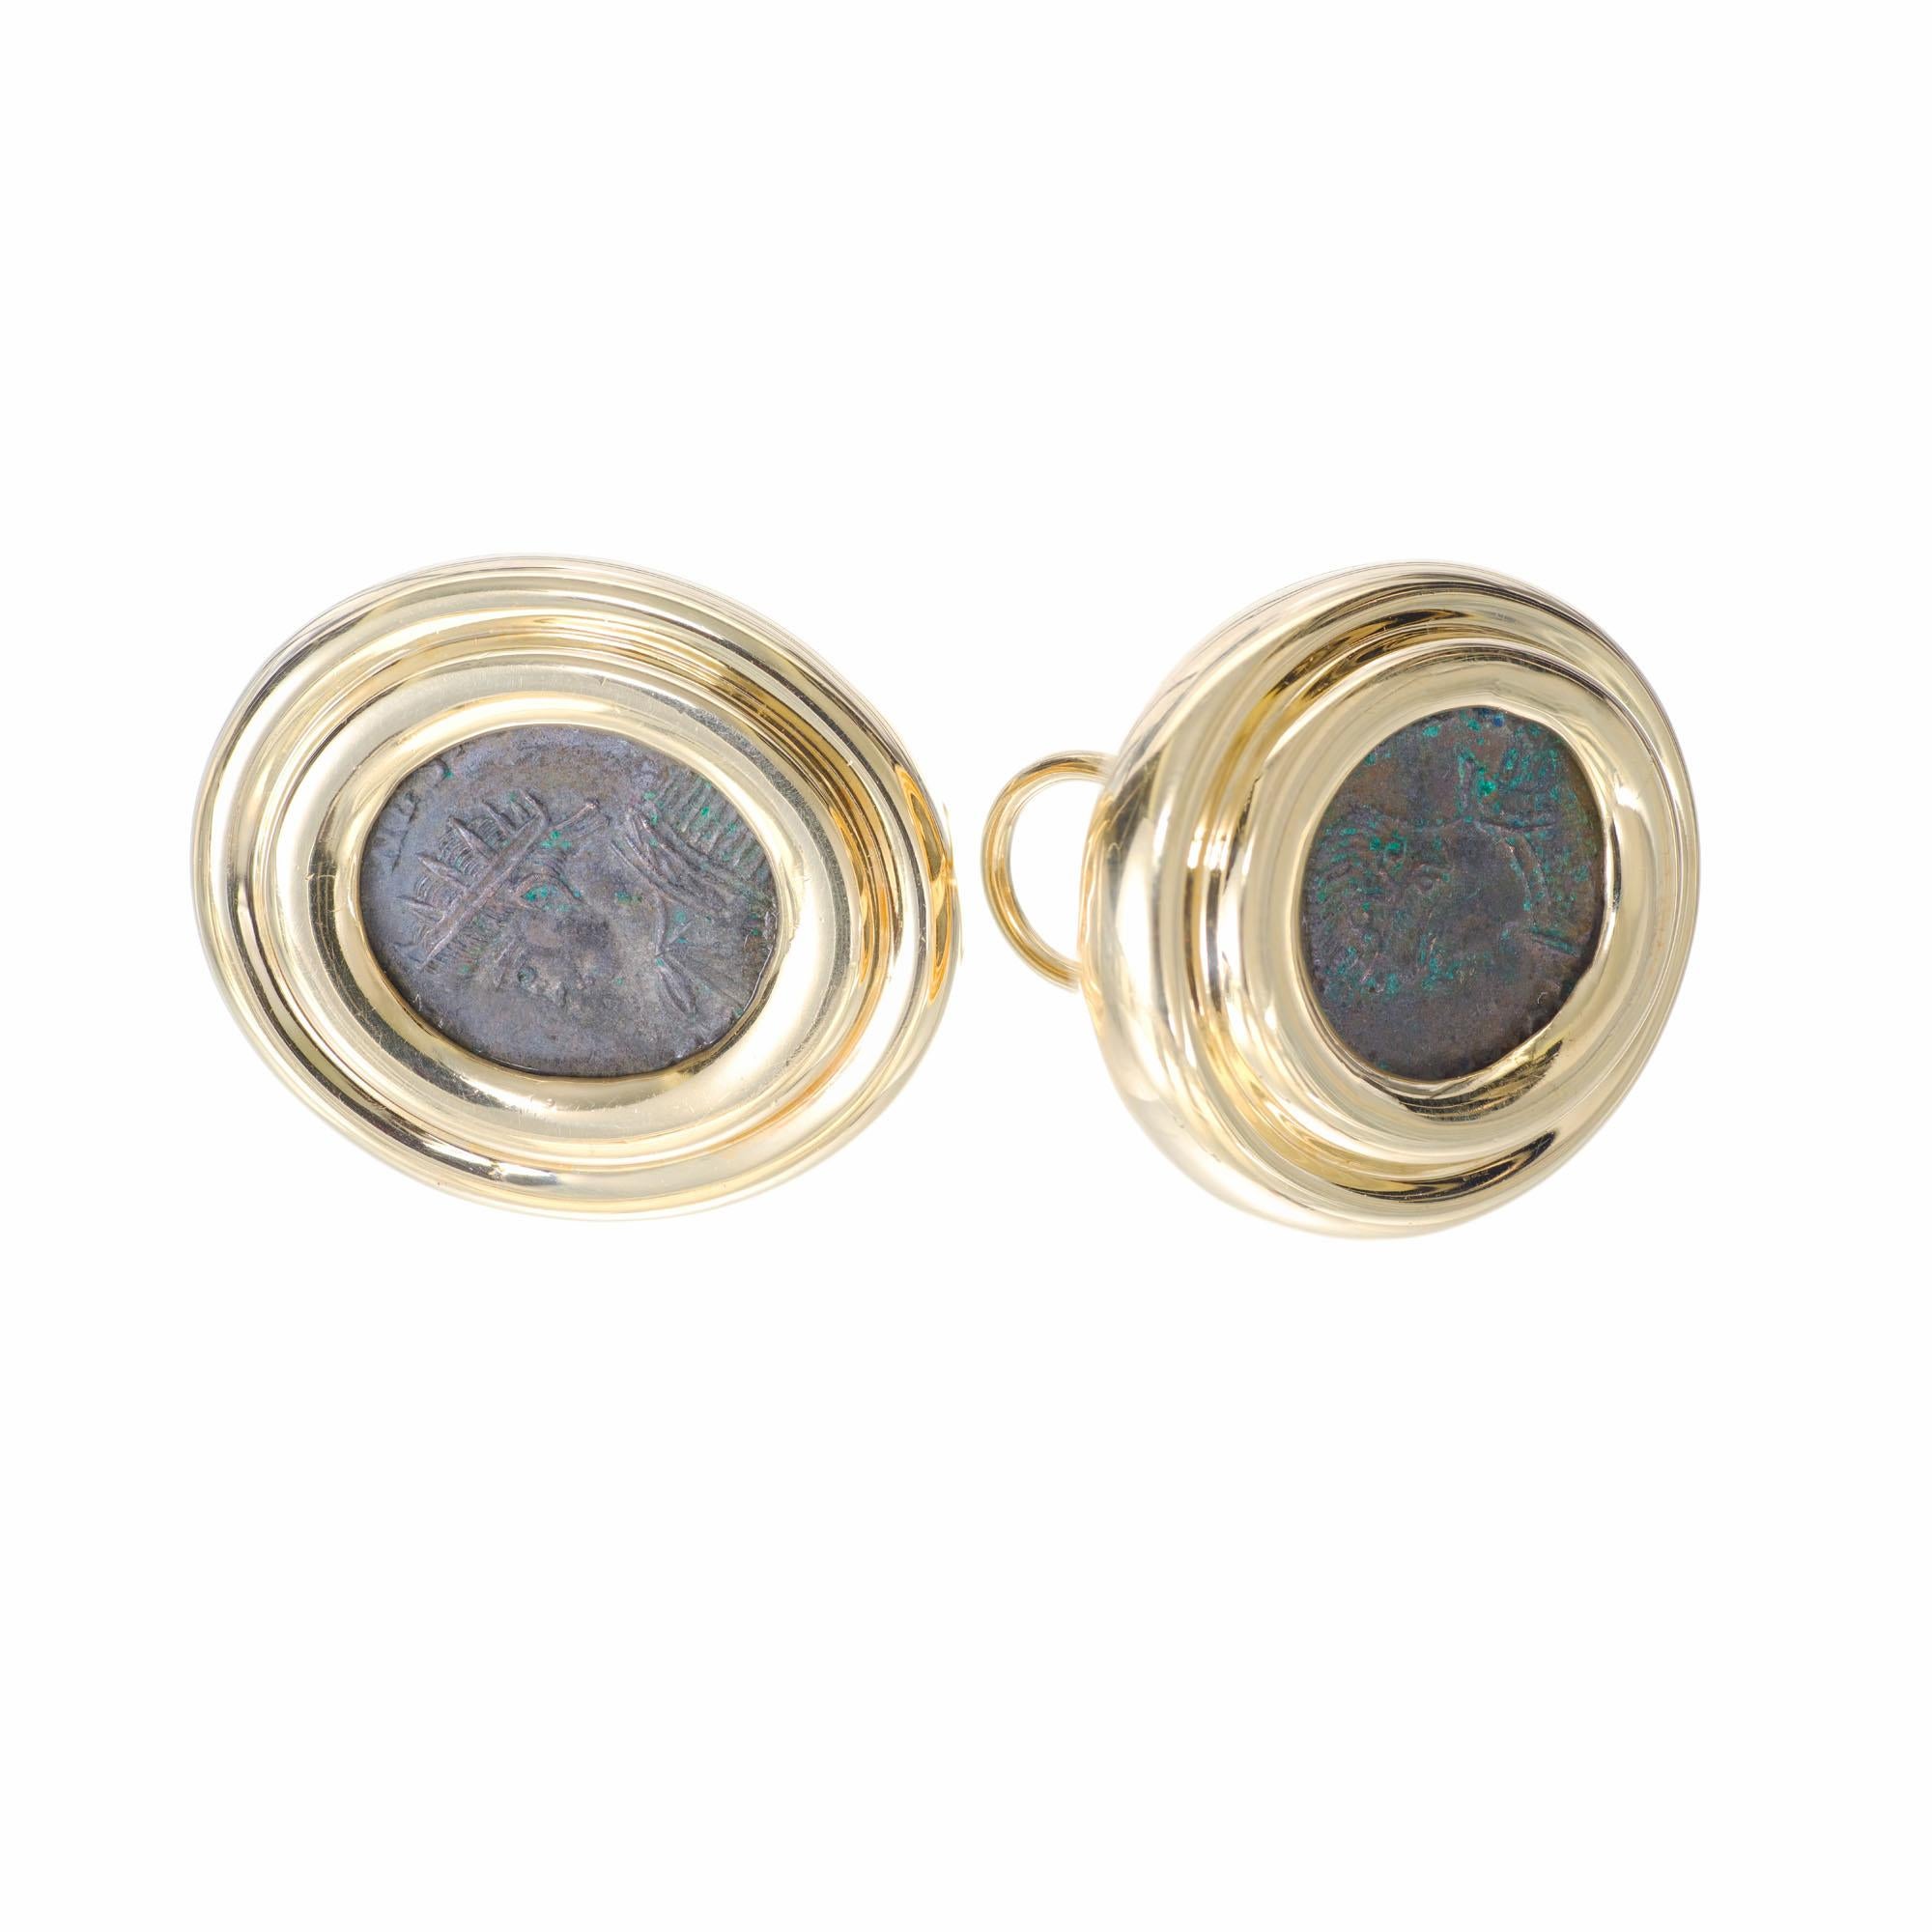 Oval clip post 14k yellow gold clip post earrings set with a matched pair of ancient coins. 

14k yellow gold 
Stamped: 14k
Top to bottom: 28.65mm or 1 1/8 Inch
Width: 25mm or 1 Inch
Depth or thickness: 6.1mm
